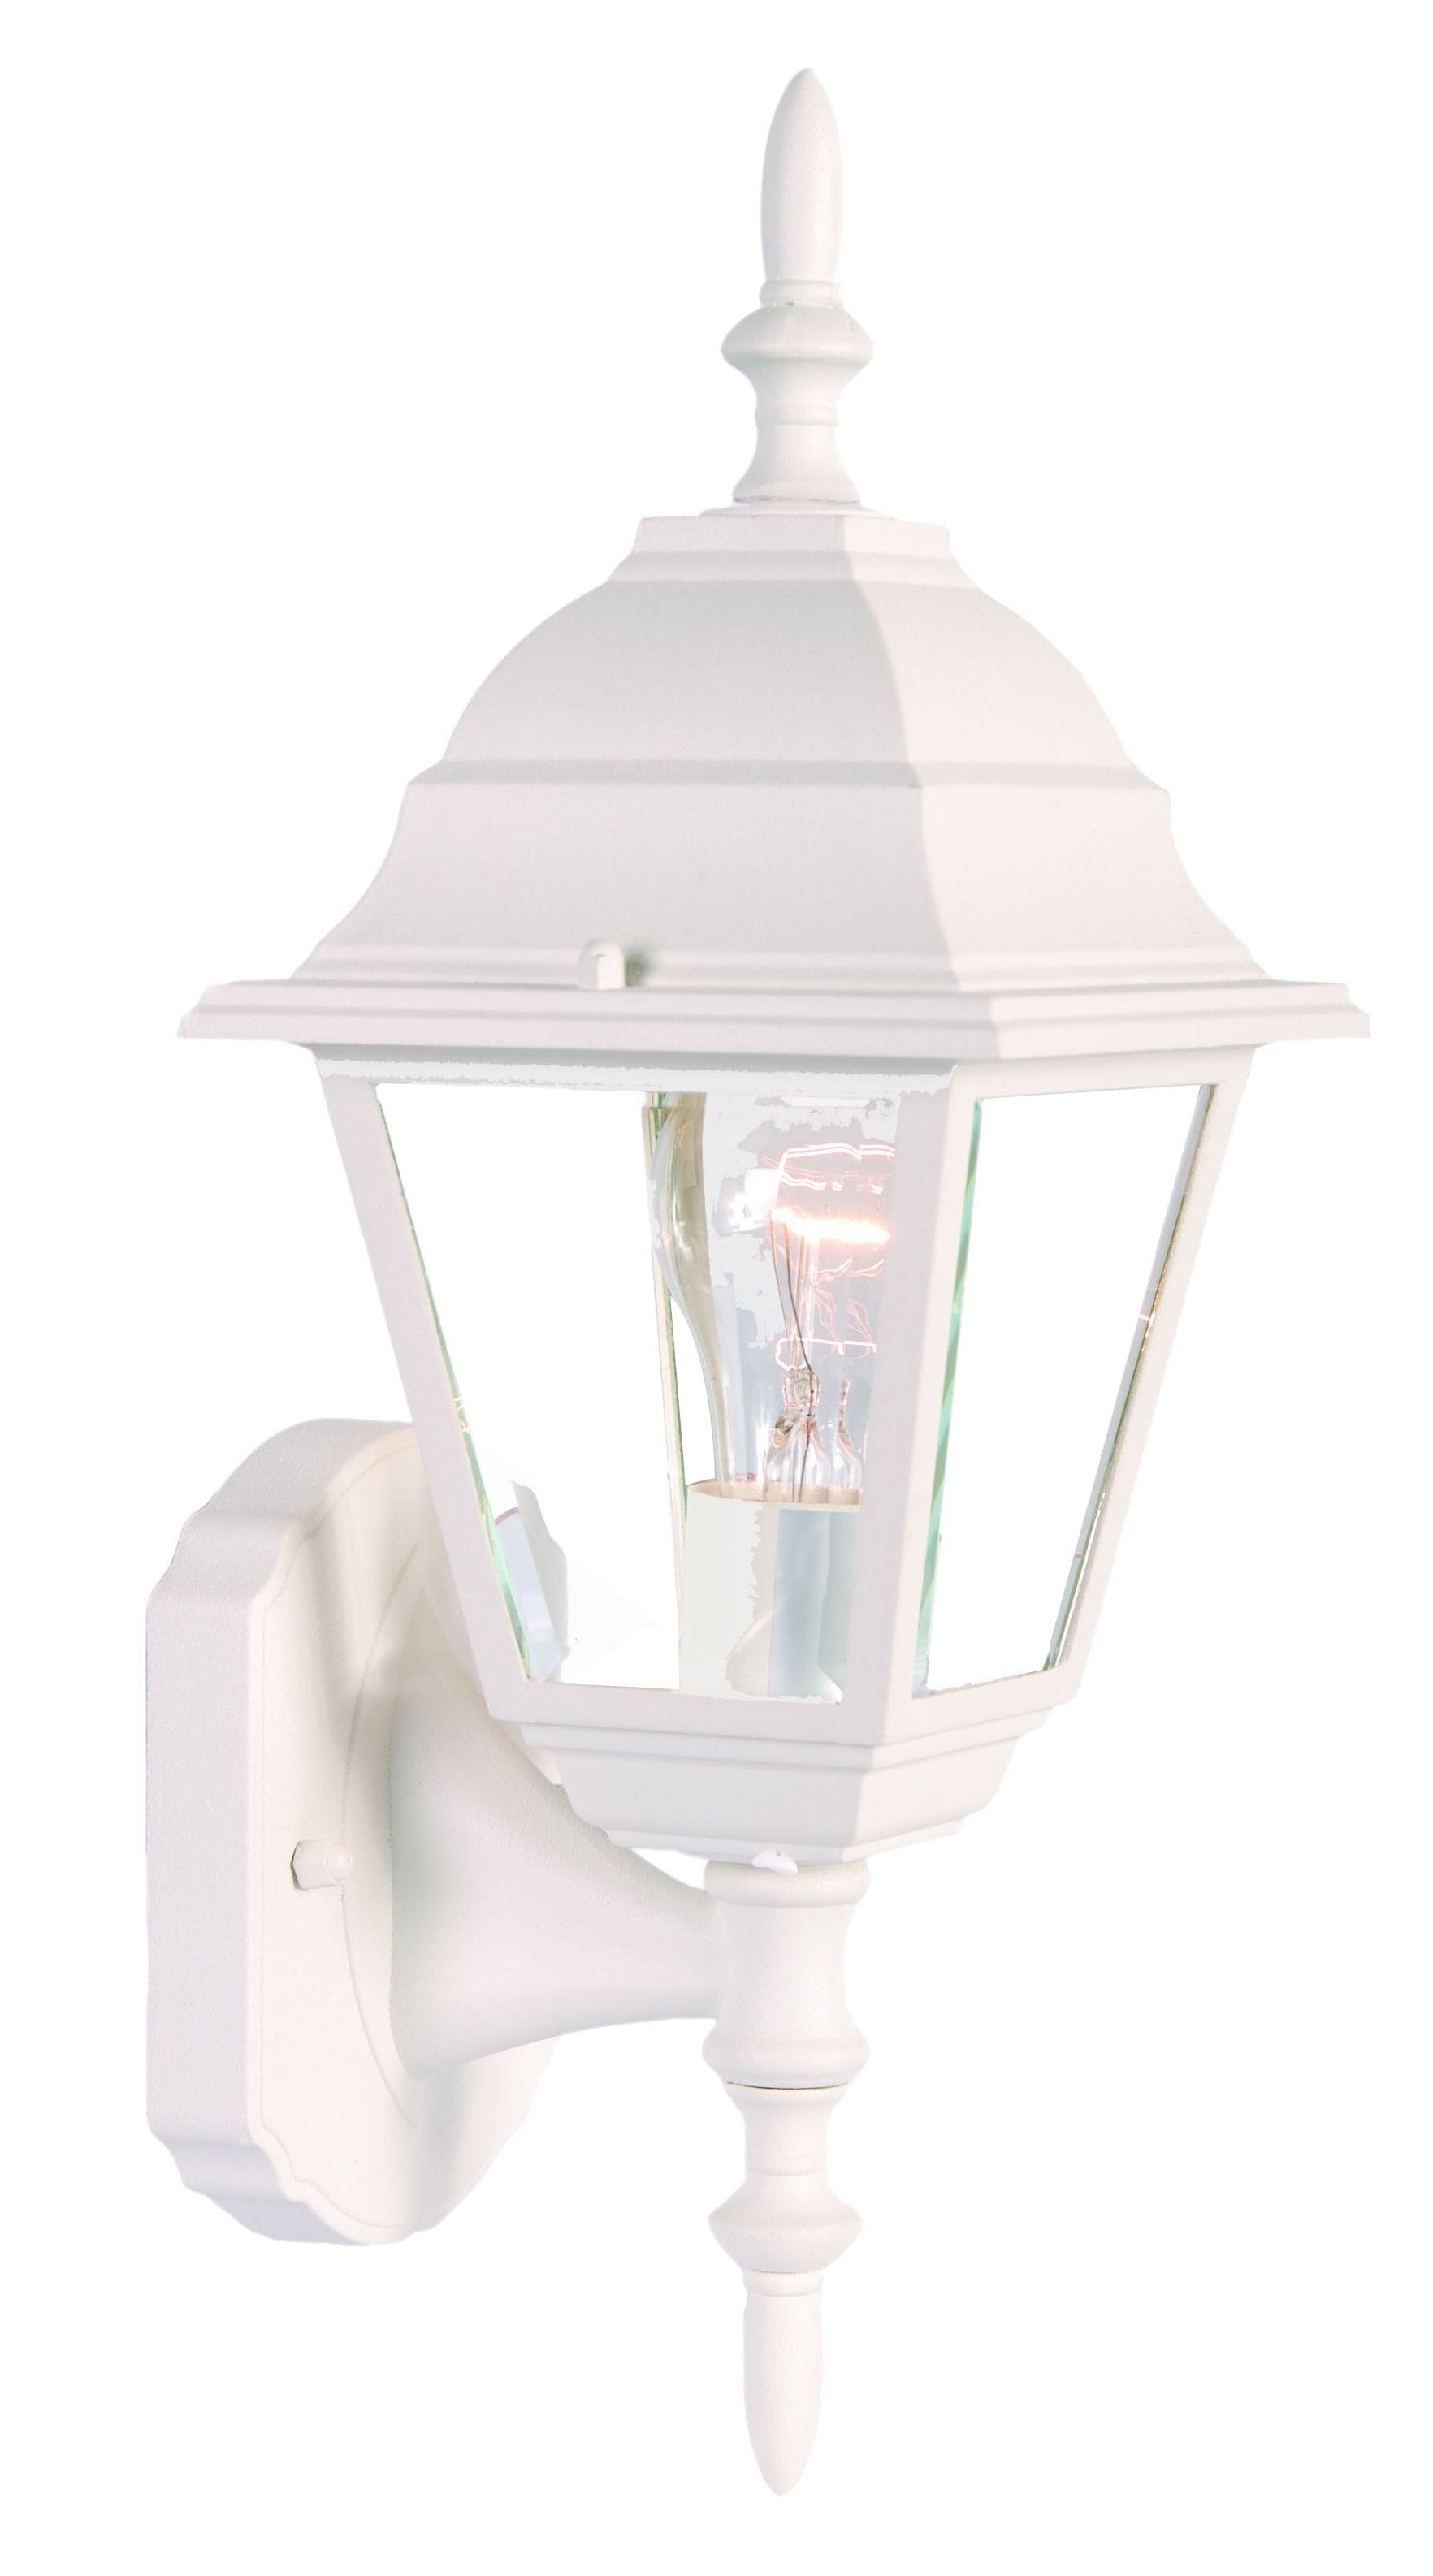 Distressed White Swing Arm Outdoor Wall Light